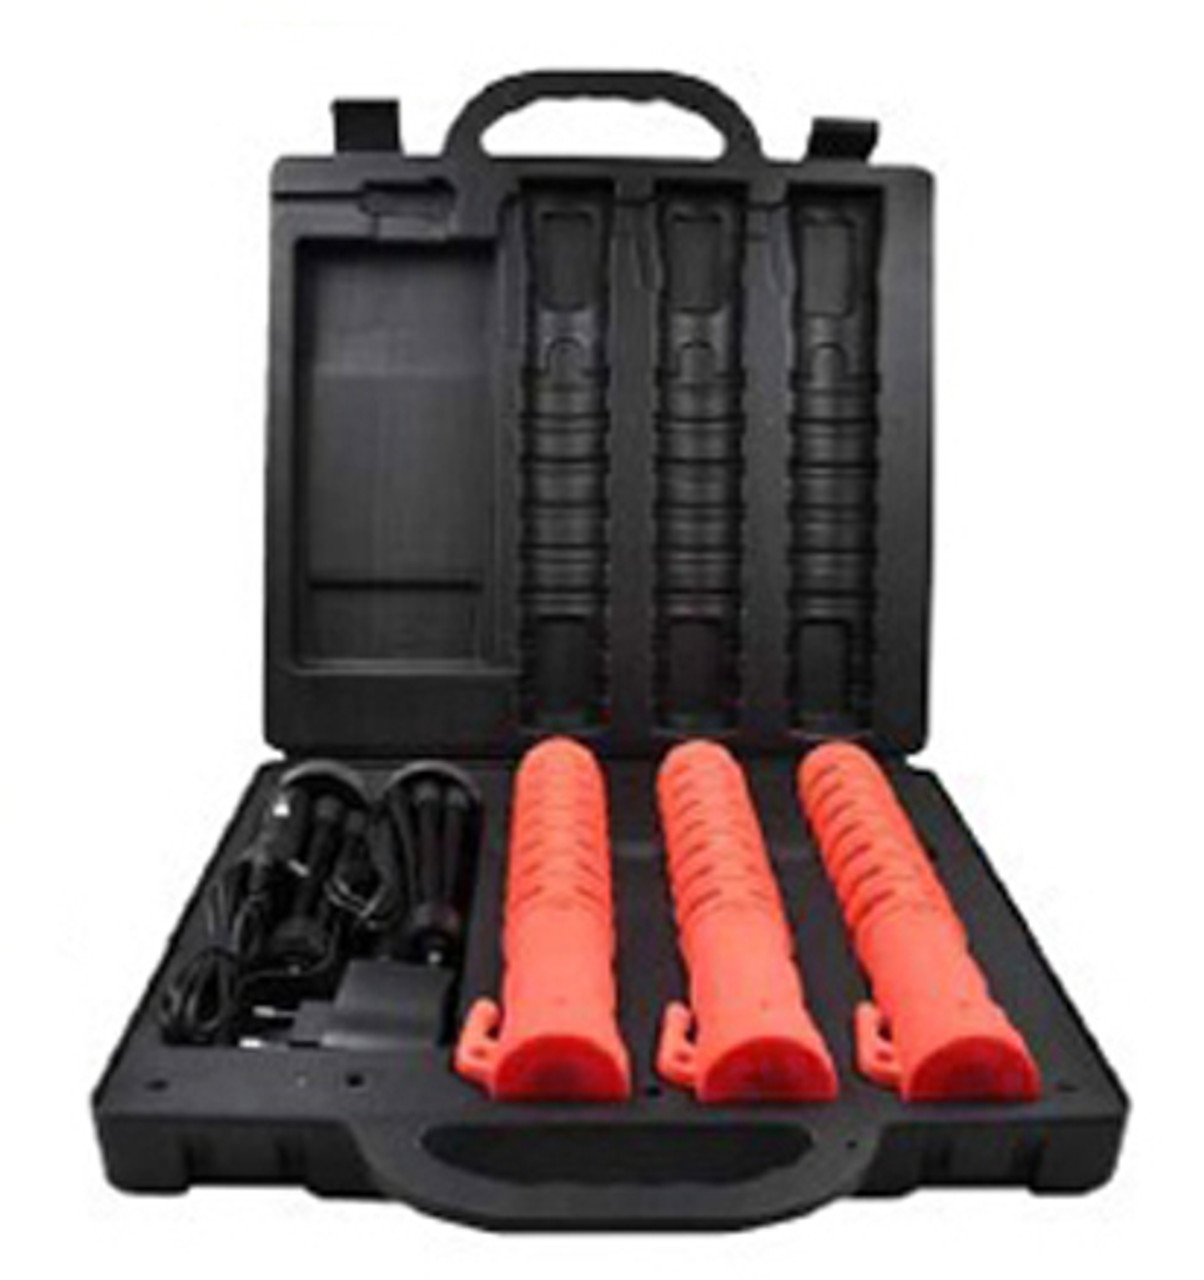 3-Piece LED Baton Flare Emergency Safety Kit w/ Charge Case Car and Wall Charger USB and stand Red Race Sport Lighting